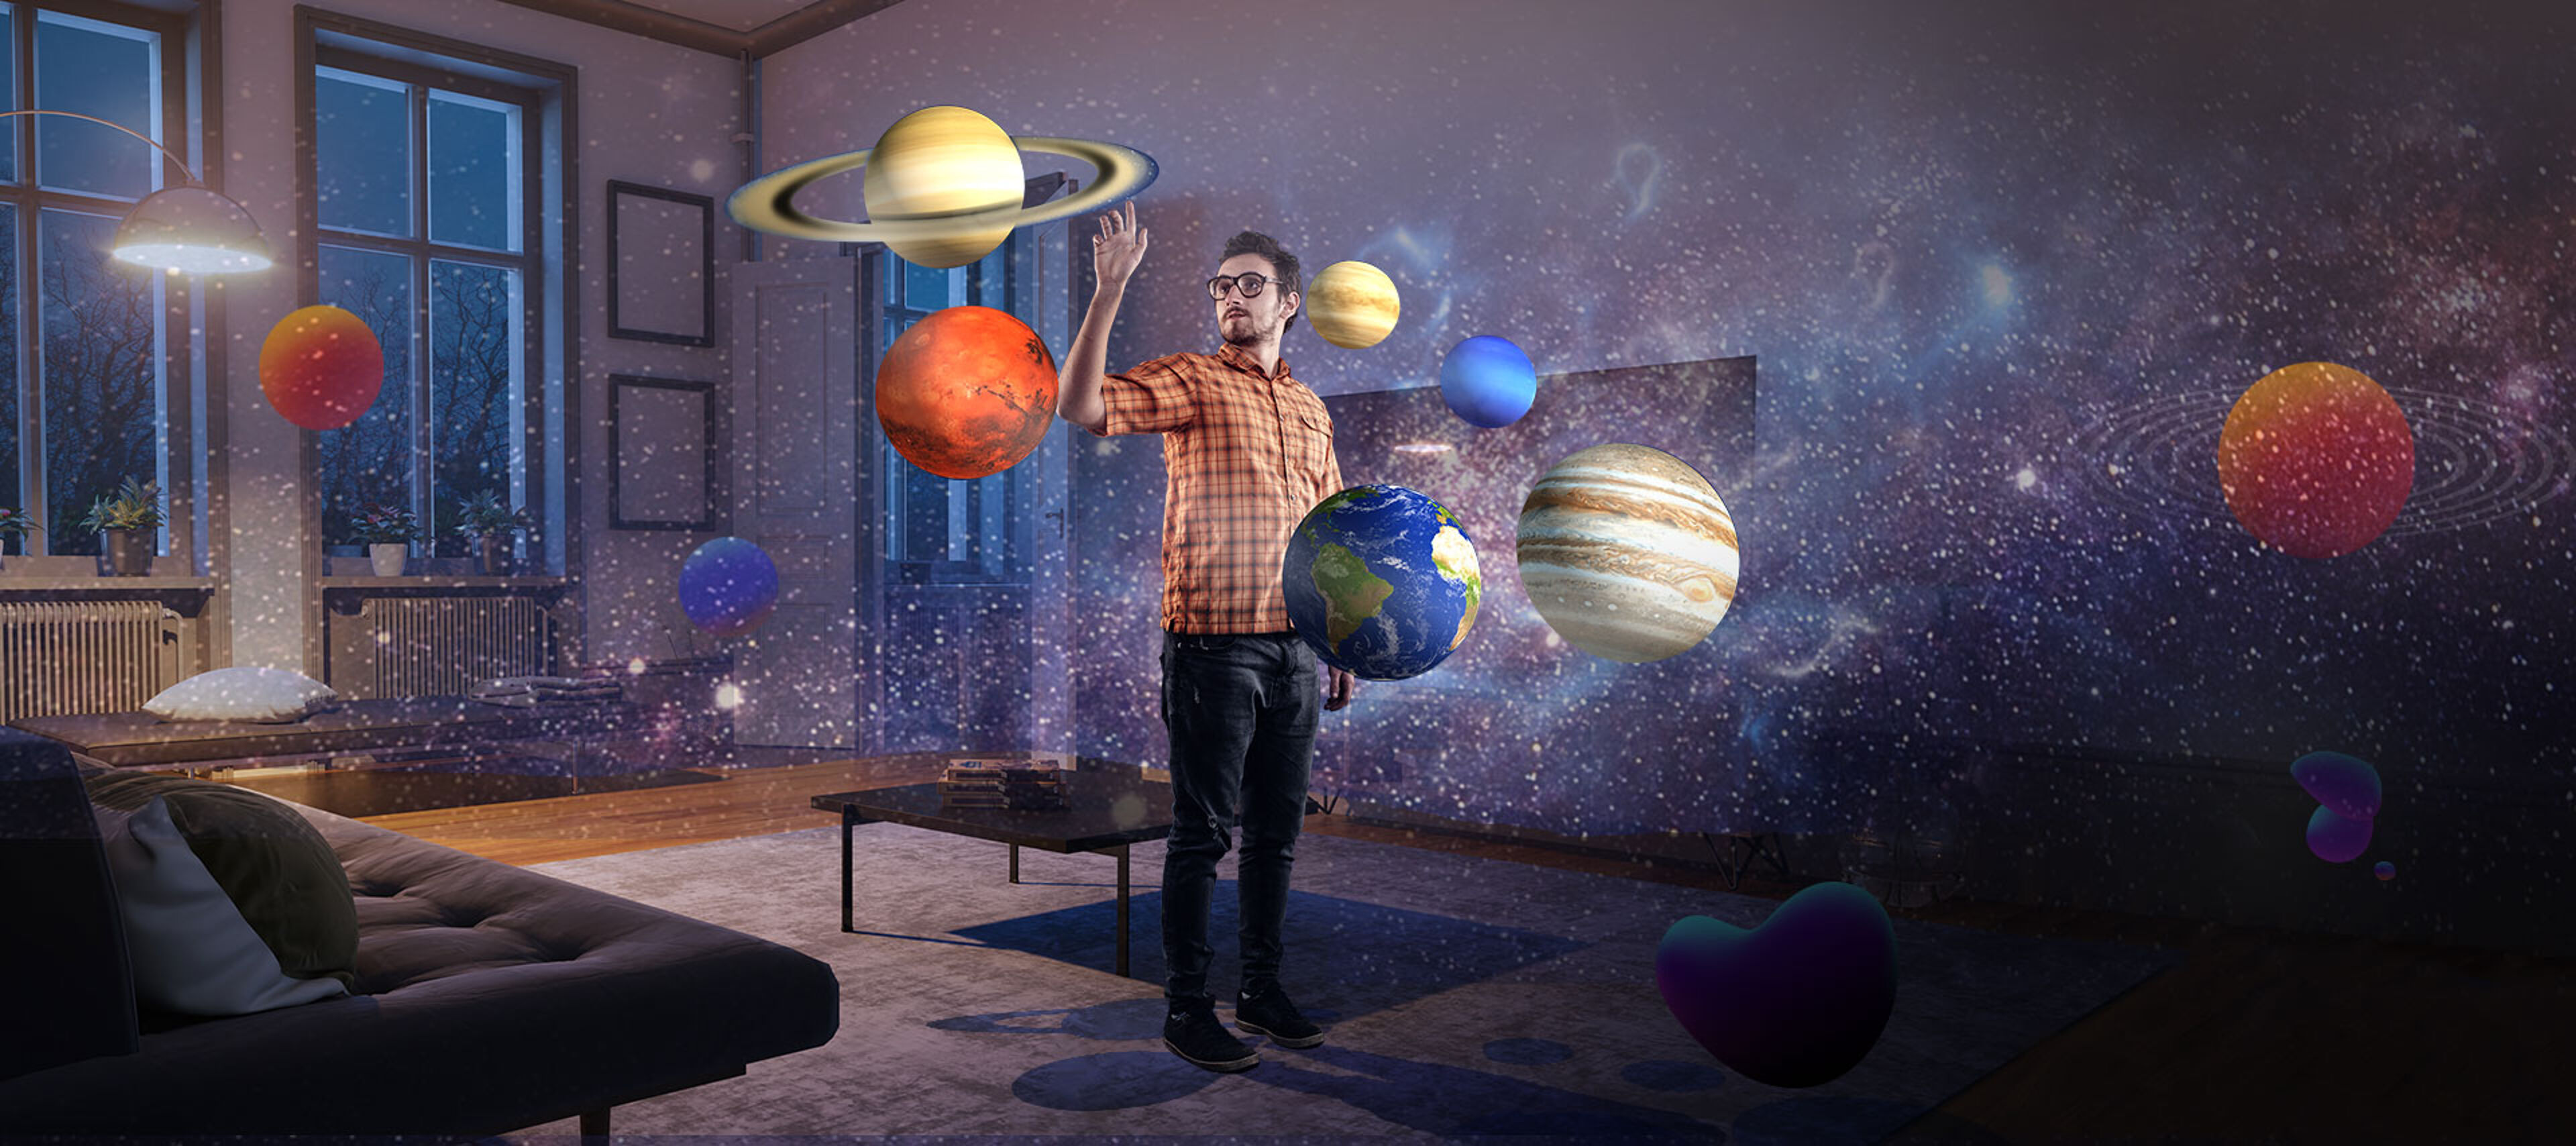 A person surrounded by 3D planets in a living room transformed into a cosmic wonderland.